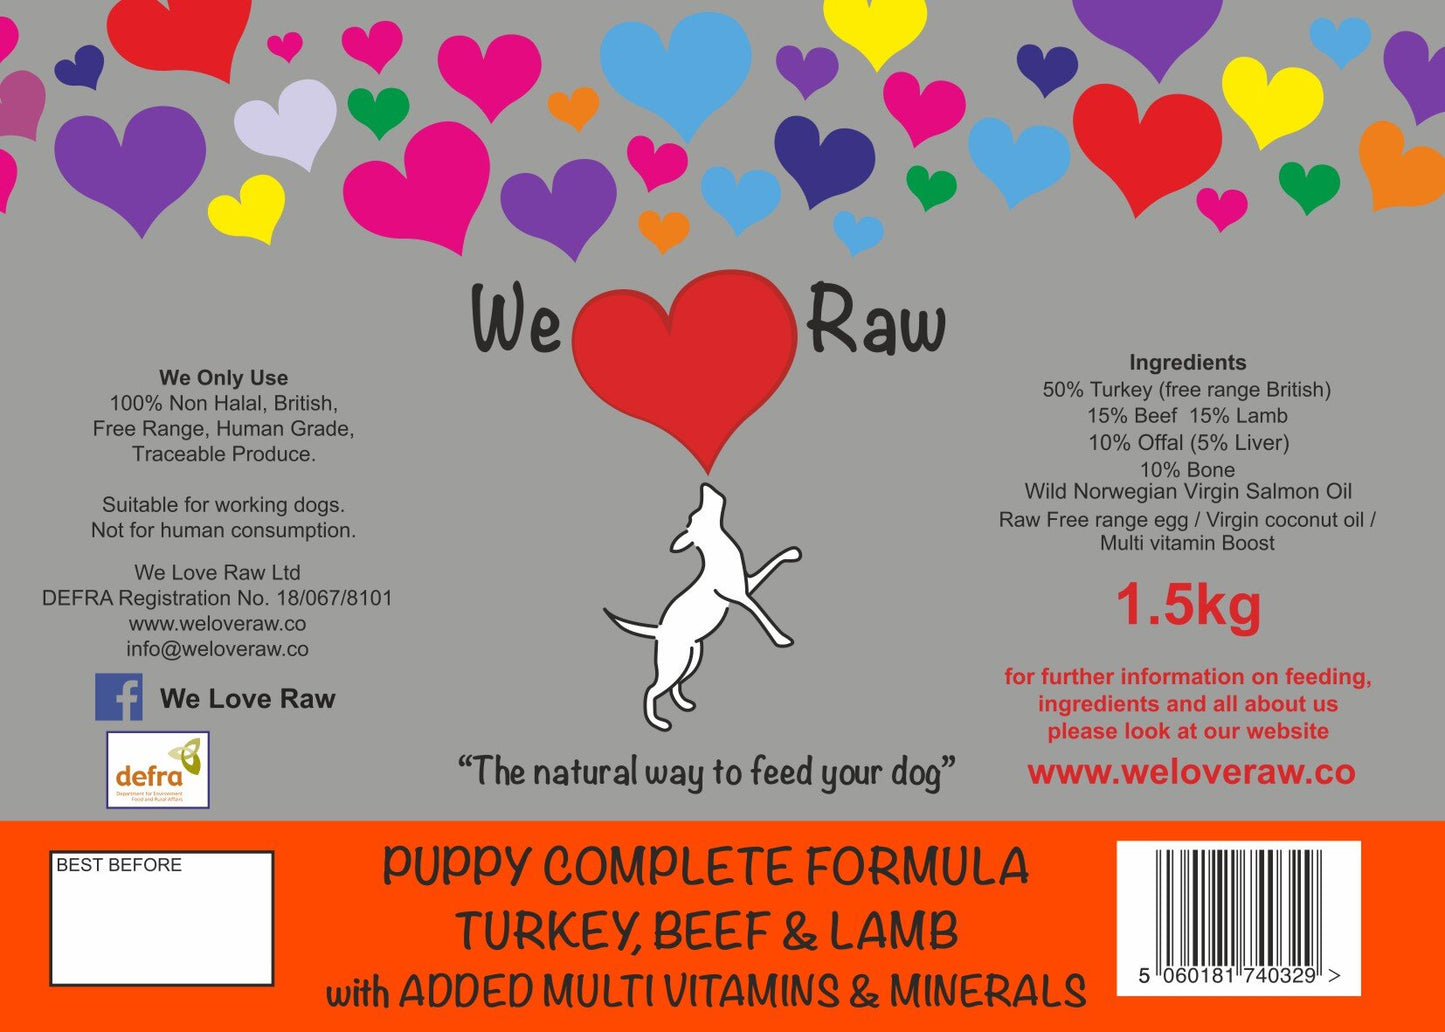 Puppy Complete Formula: Turkey, Beef & Lamb with Added Multivitamins & Minerals